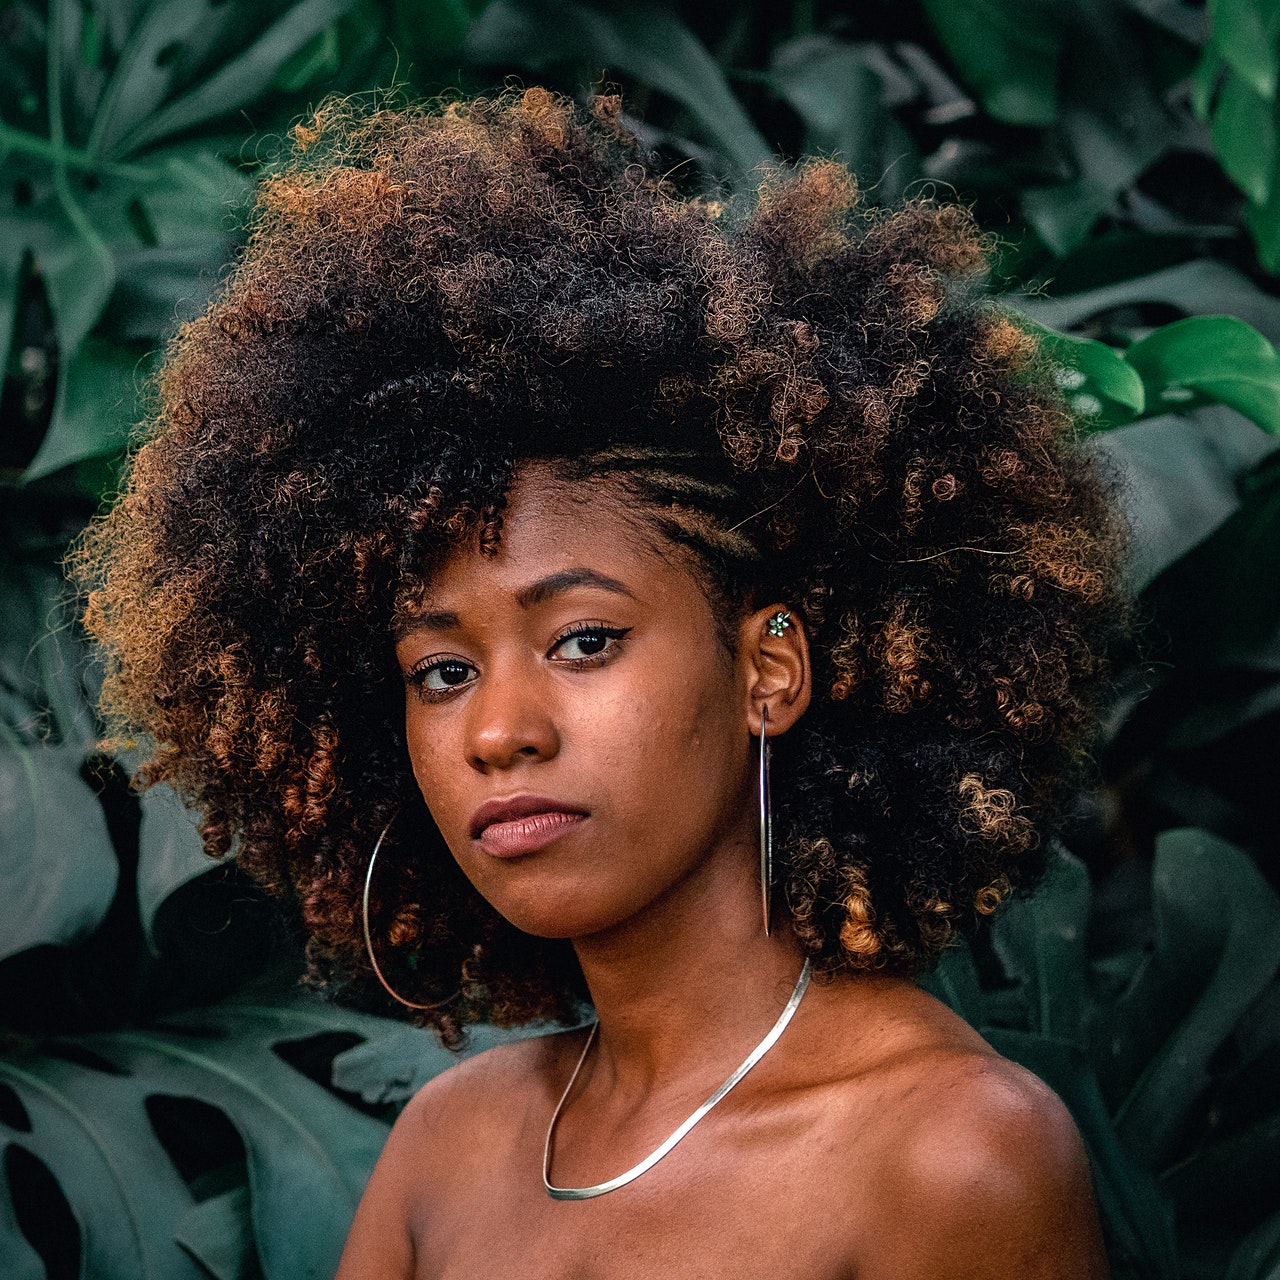 Natural Hair Mag - How to Grow Your Natural Hair Fast! | 2018 Edition IG:  @nickybnatural https://www.naturalhairmag.com/how-to-grow-hair-fast-2018/ |  Facebook